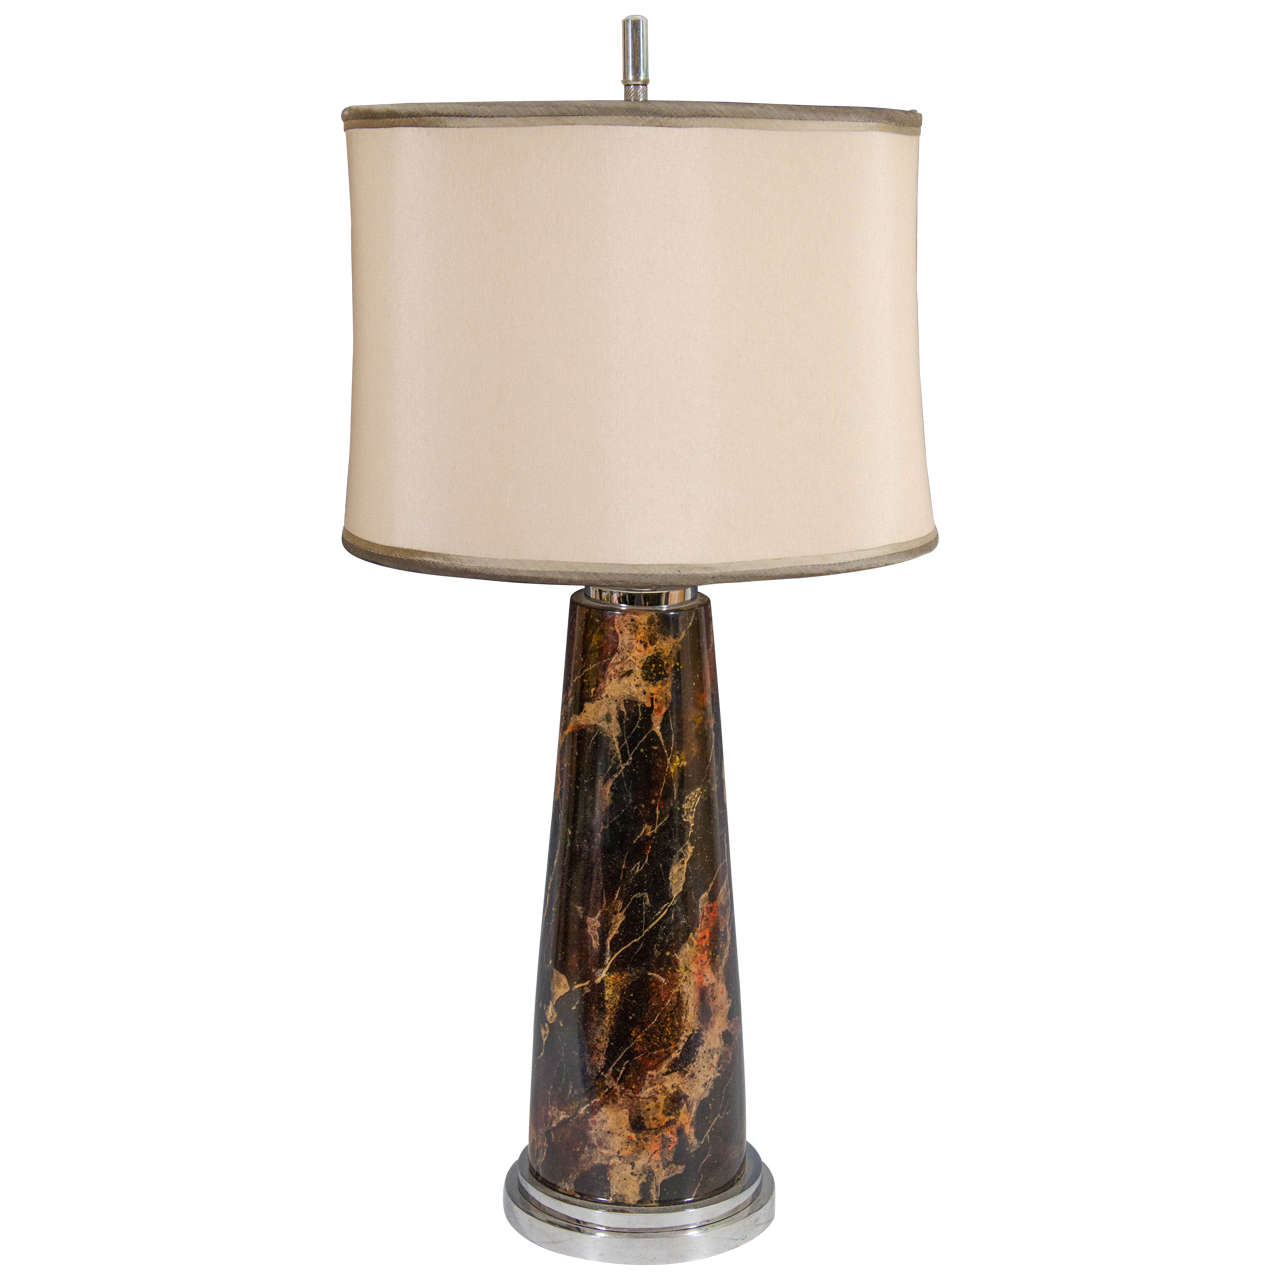 Faux Tortoise-Shell Table Lamp with Chrome Base